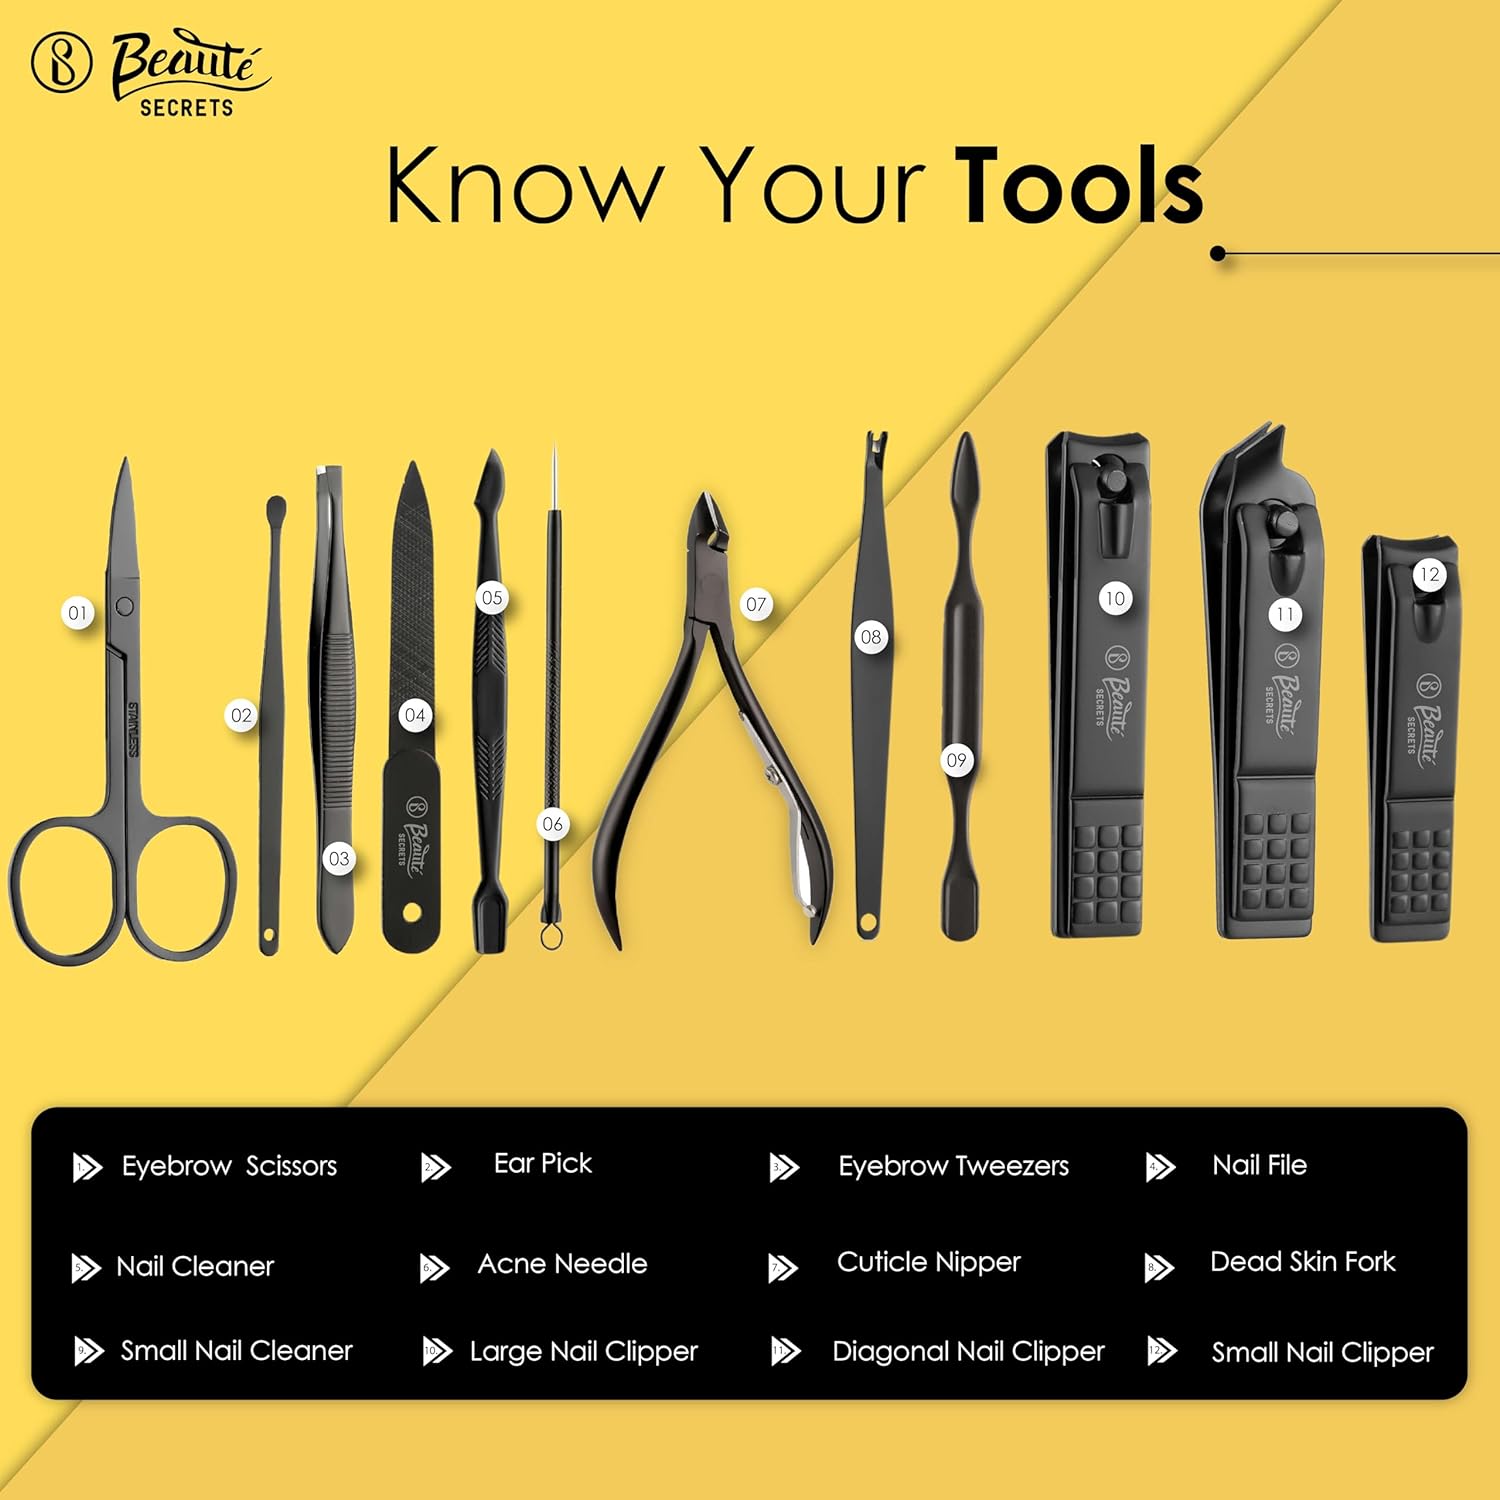 Nail Accessories Tool Kit - A comprehensive set of grooming tools for achieving salon-quality nails at home.